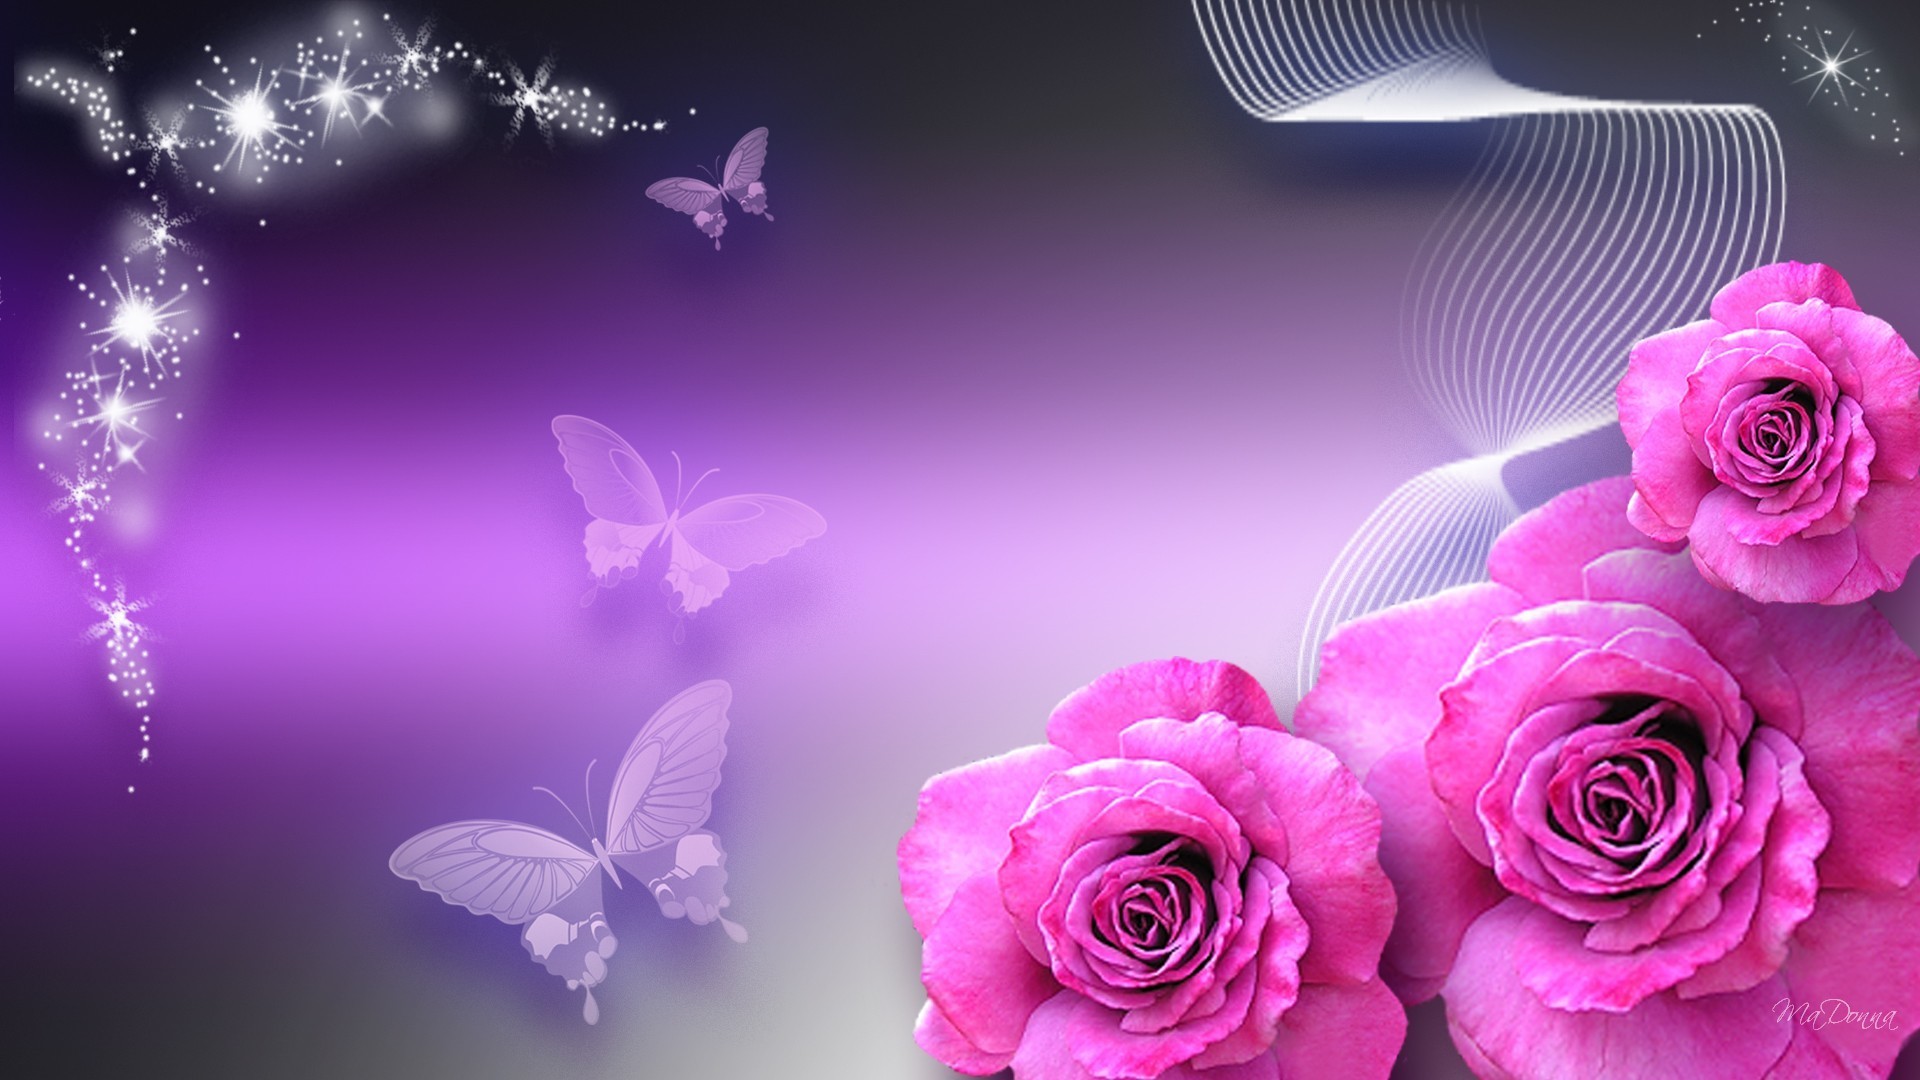 1920x1080  Pretty Pink Sparkly Backgrounds For Desktops